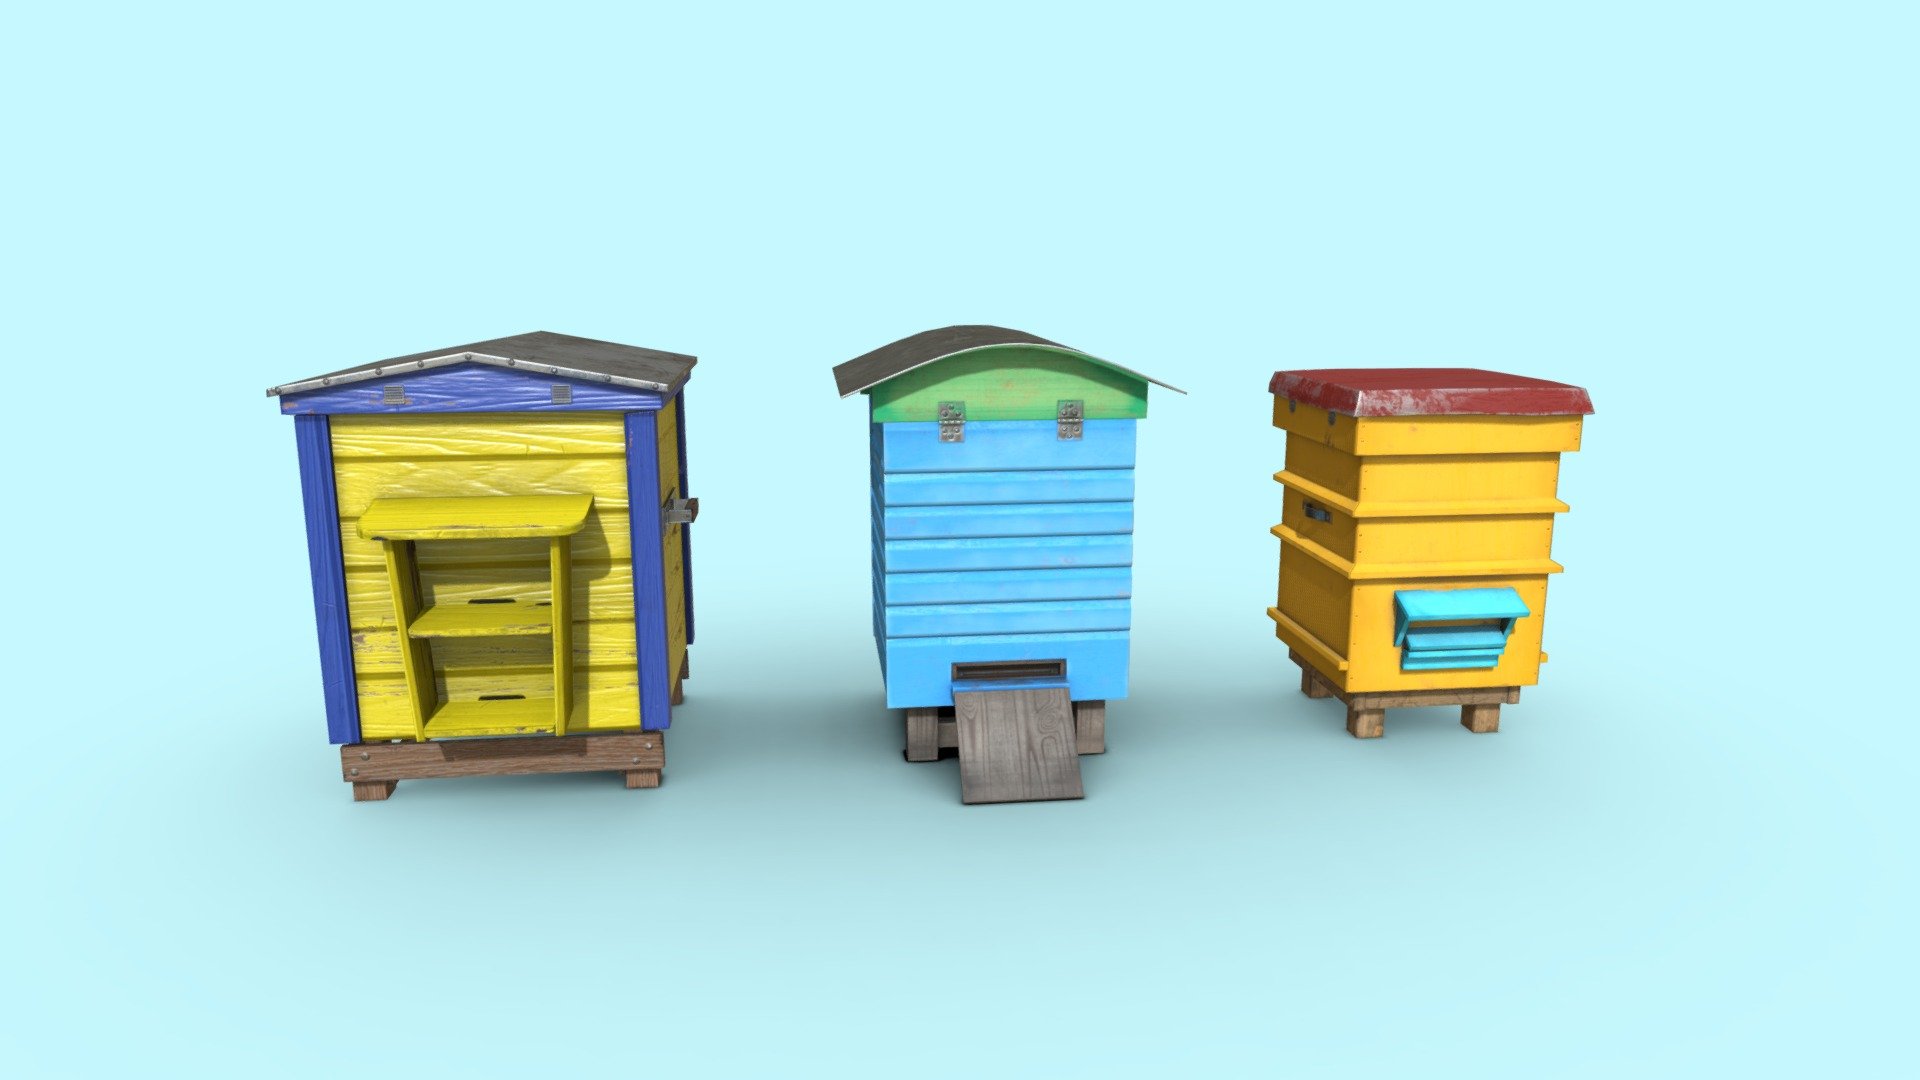 Beehives - a small pack of trhee colorful beehive models.




Includes 3 low poly models.

Modes are Game-Ready/VR ready.

Models are UV mapped and unwrapped (non-overlapping).

Assets are fully textured, 2048x2048.png’s. PBR

Models are ready for Unity and Unreal game engines.

File Format: .FBX

Additional zip file contains all the files 3d model